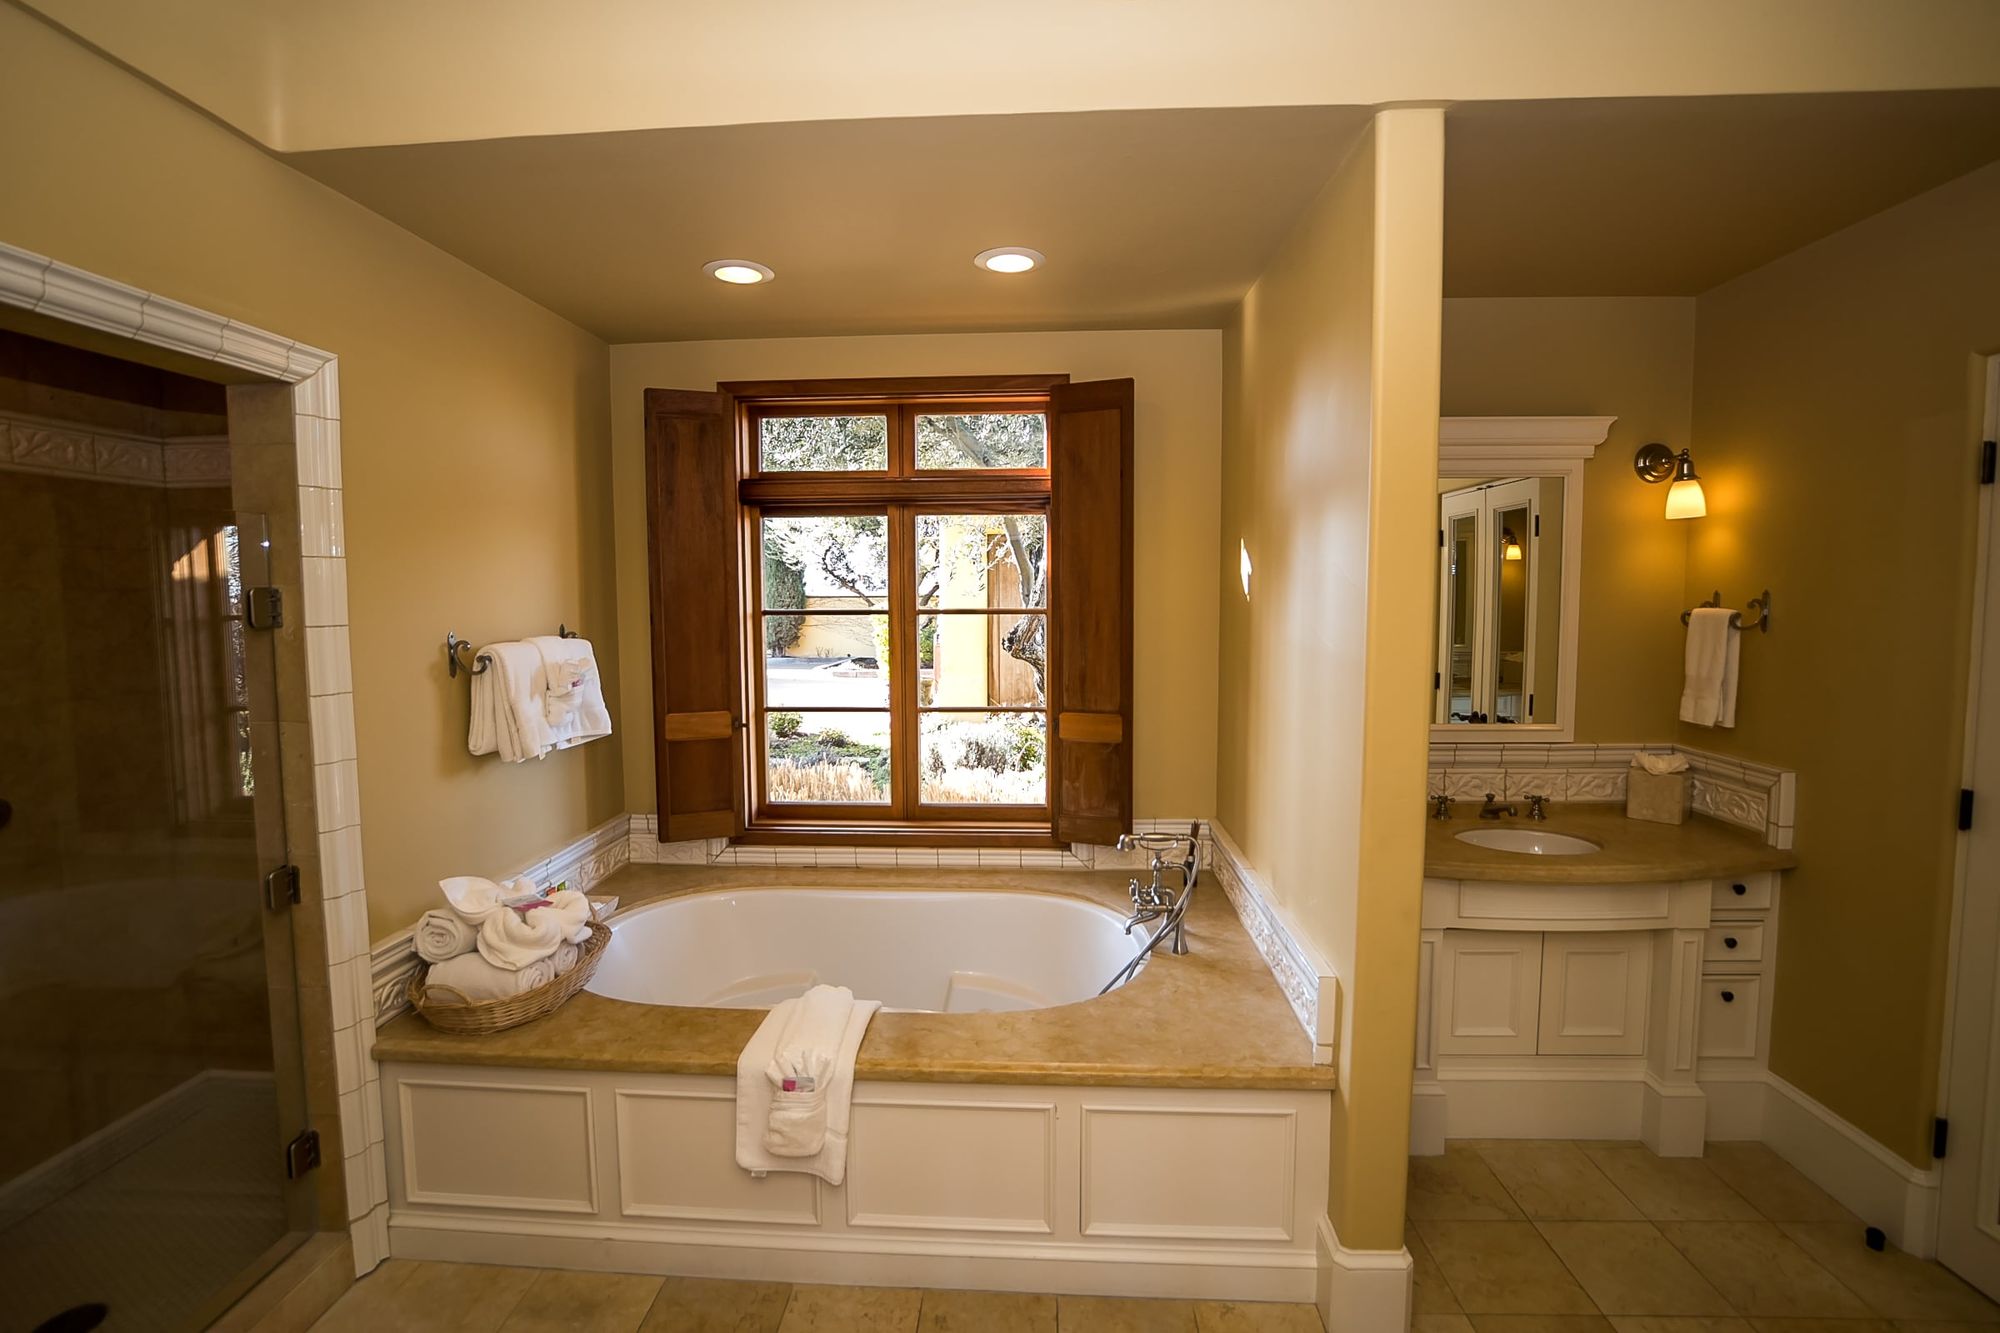 Bathroom with spa tub and towels in a basket with a vanity to the left